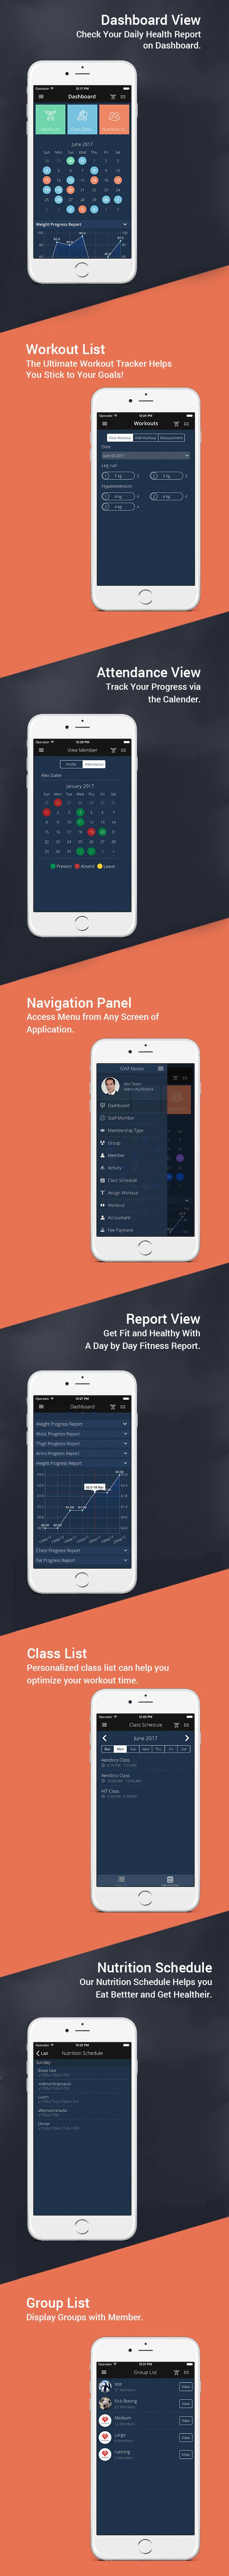 Gym master iphone mobile app